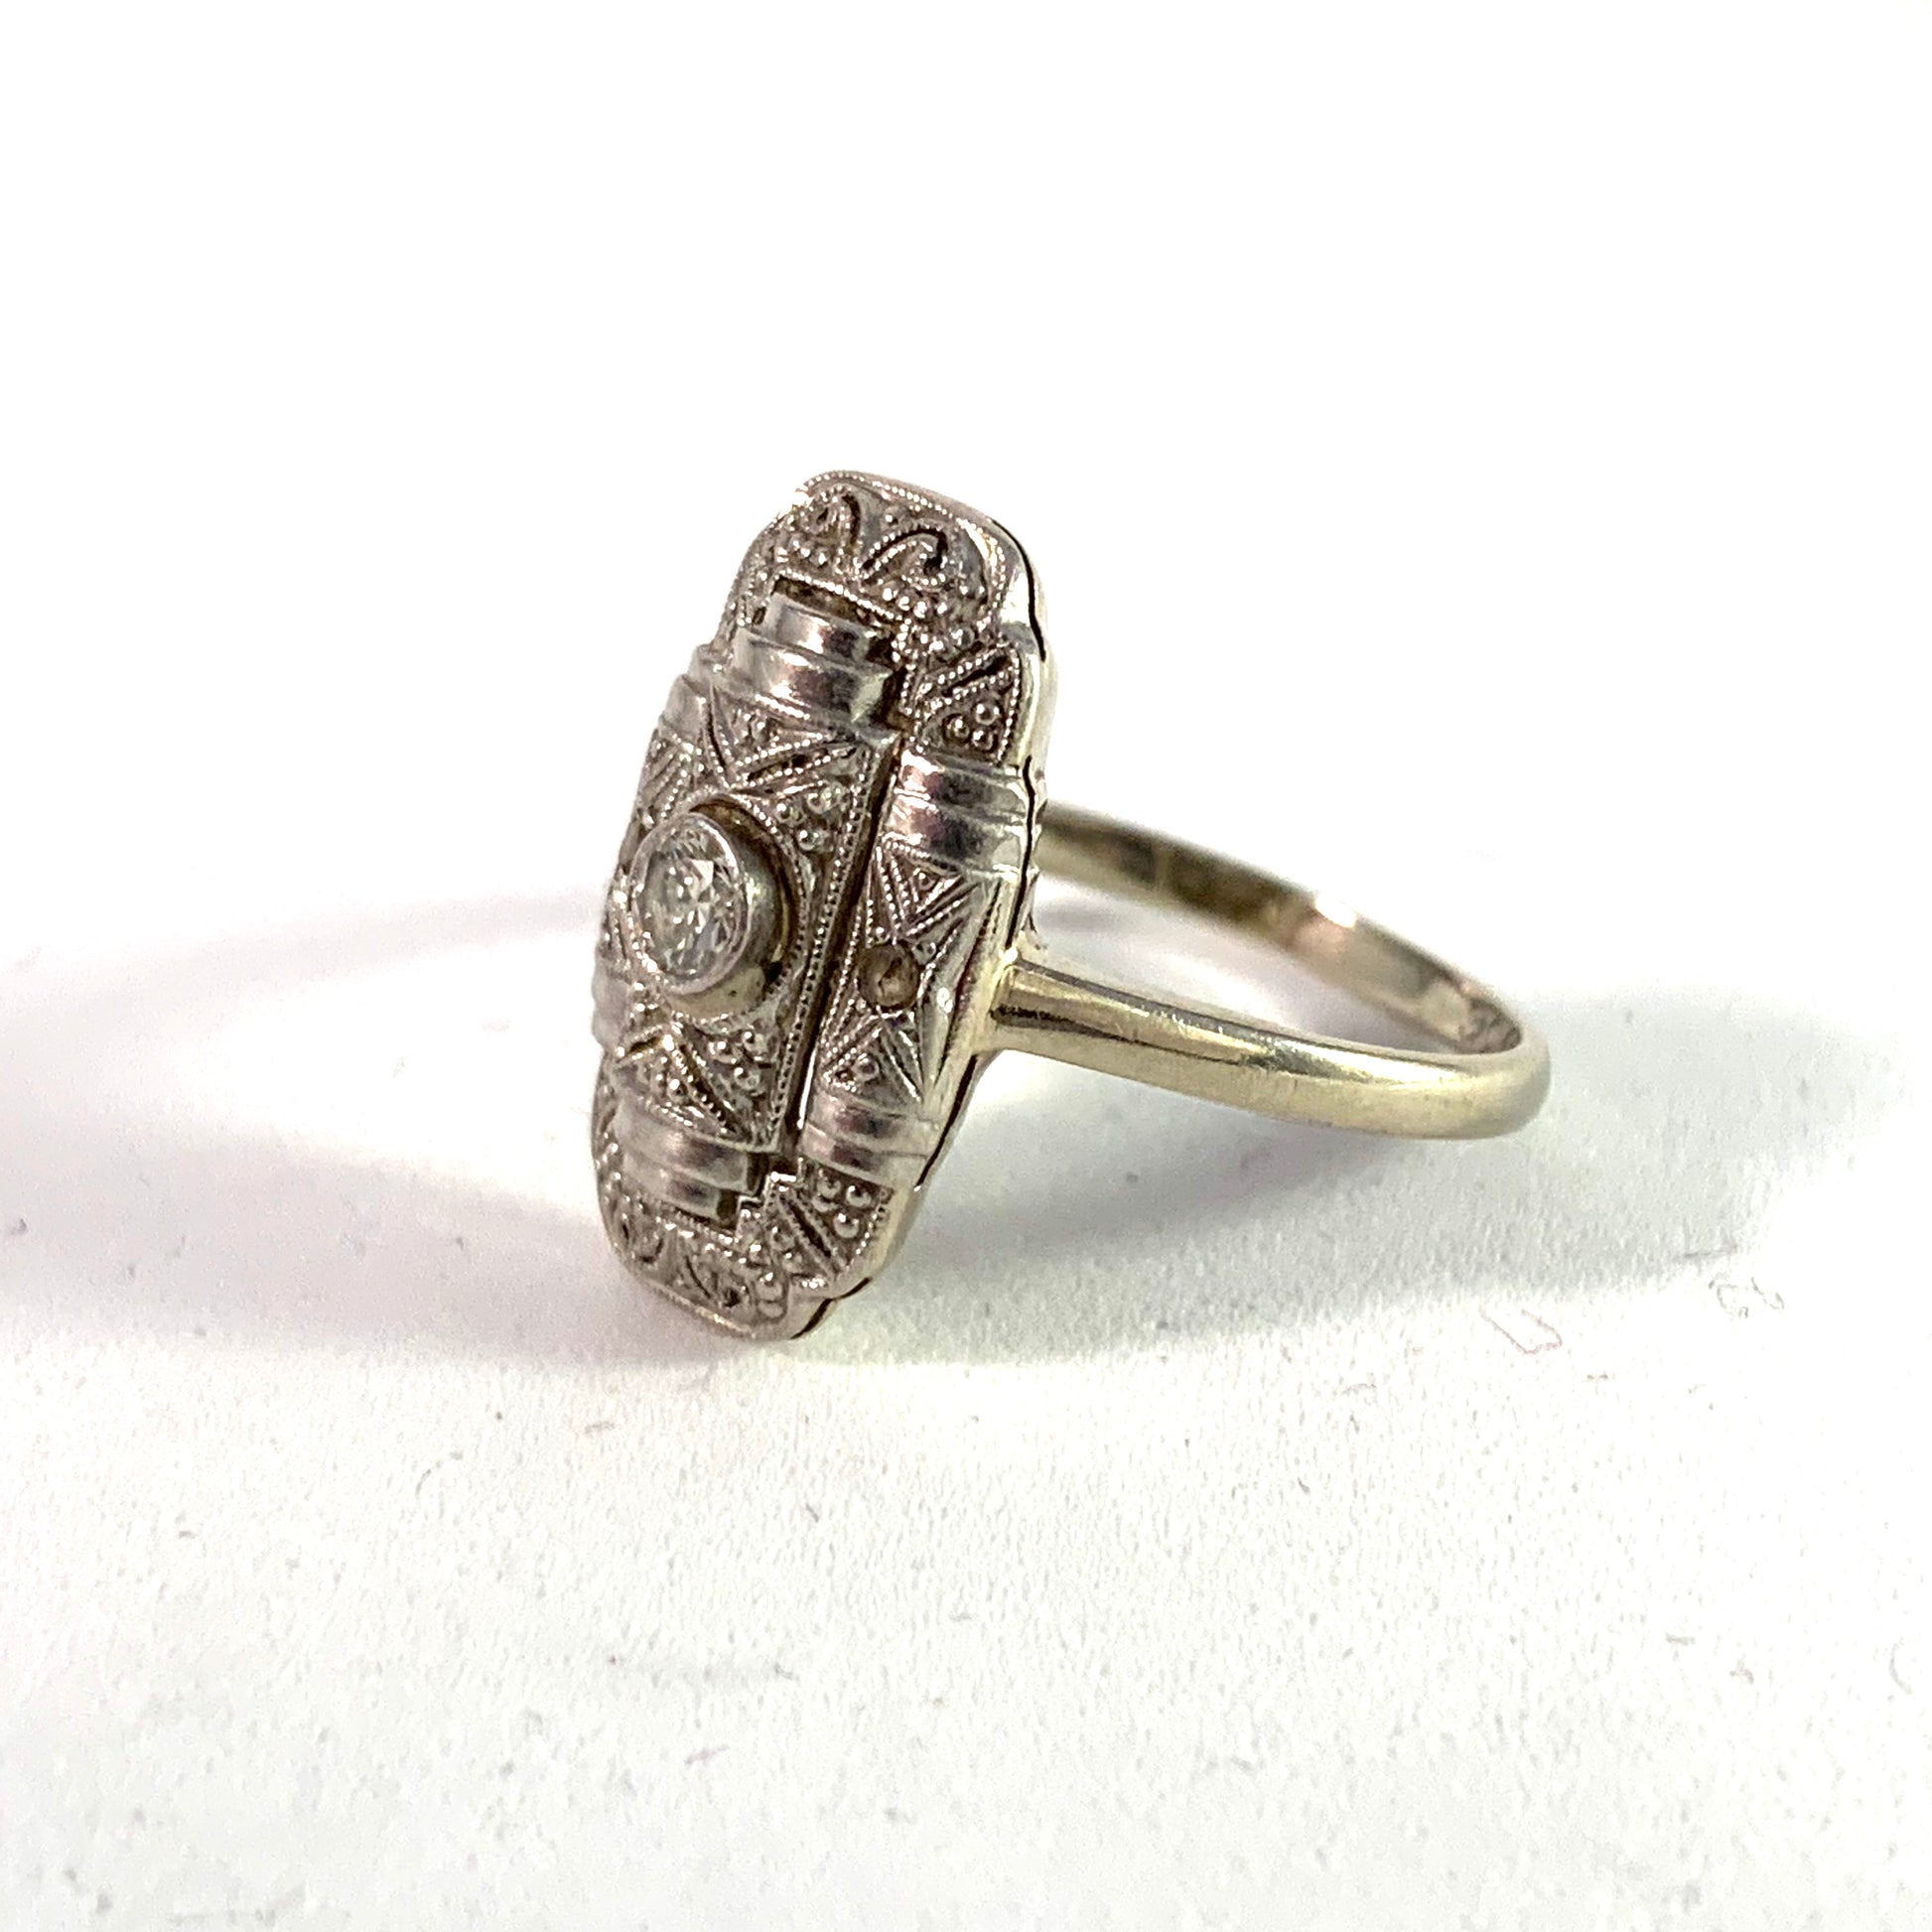  Art Deco 18k Gold Old Cut and Rose Cut Diamond Ring.